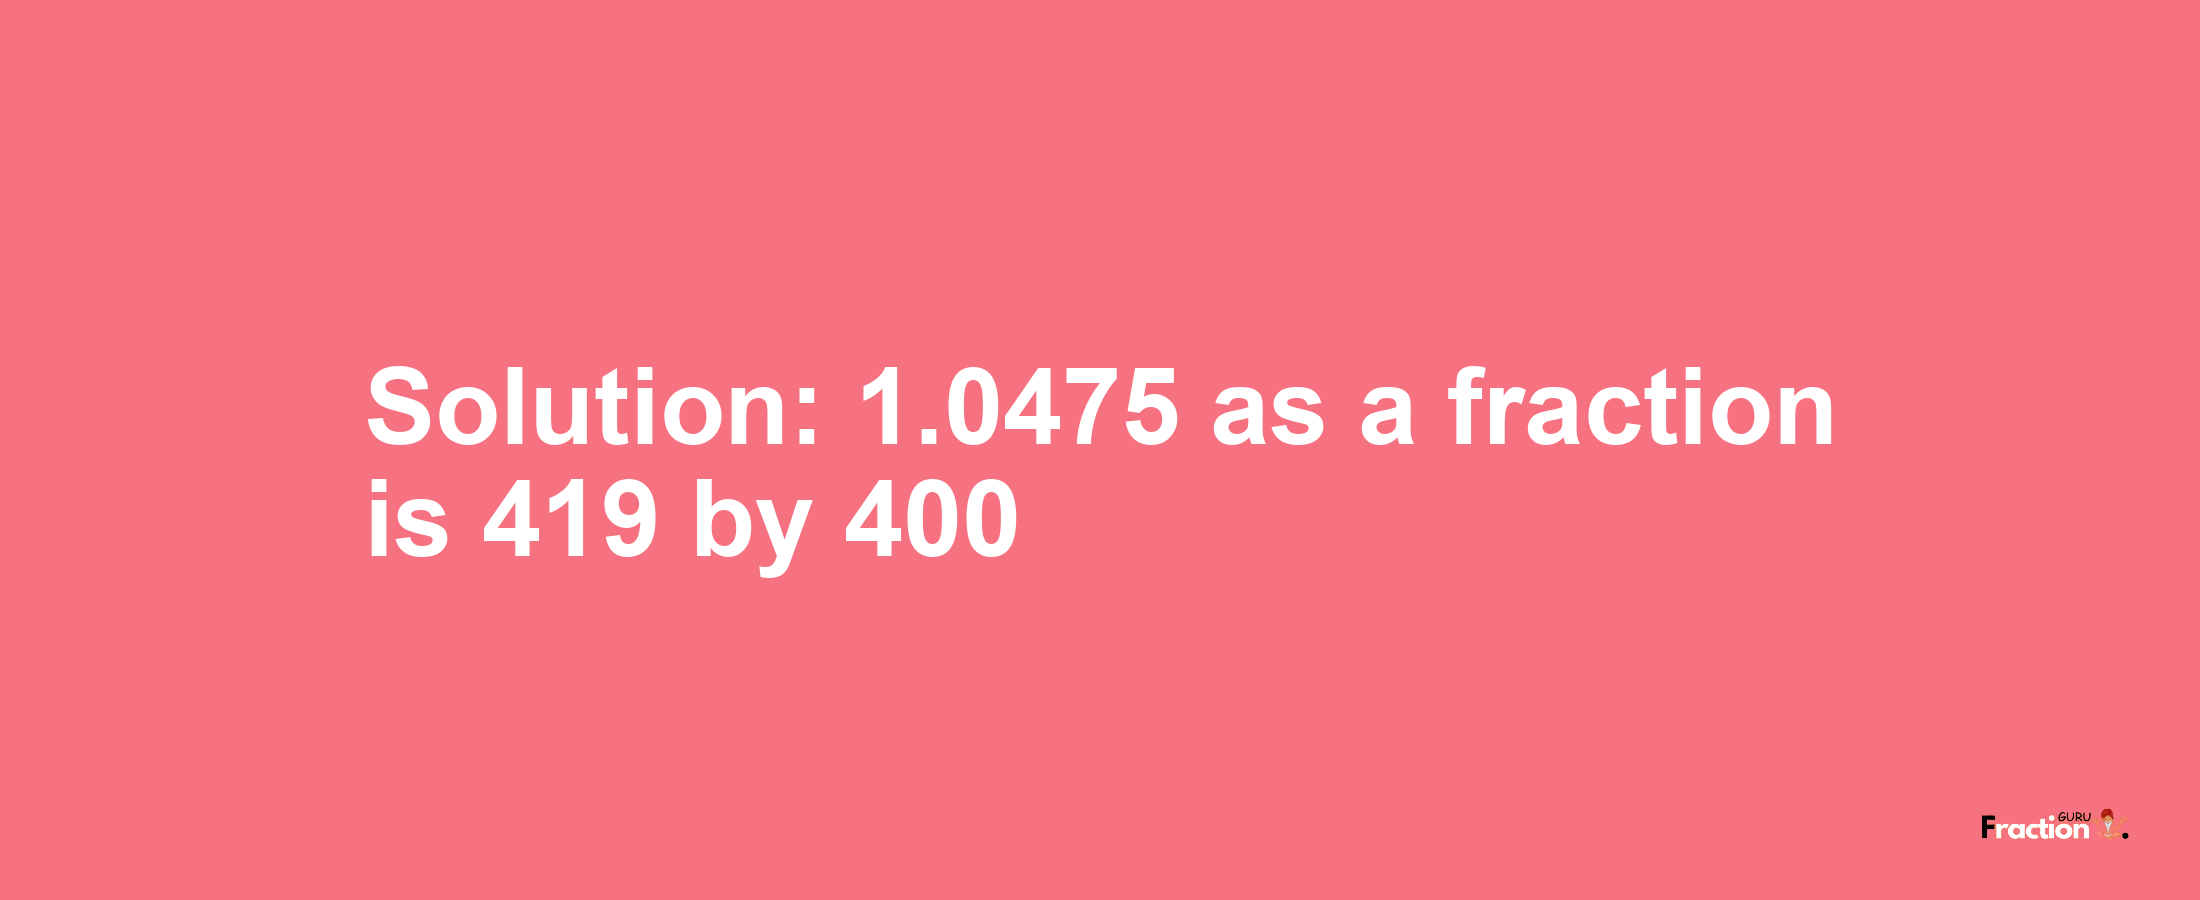 Solution:1.0475 as a fraction is 419/400